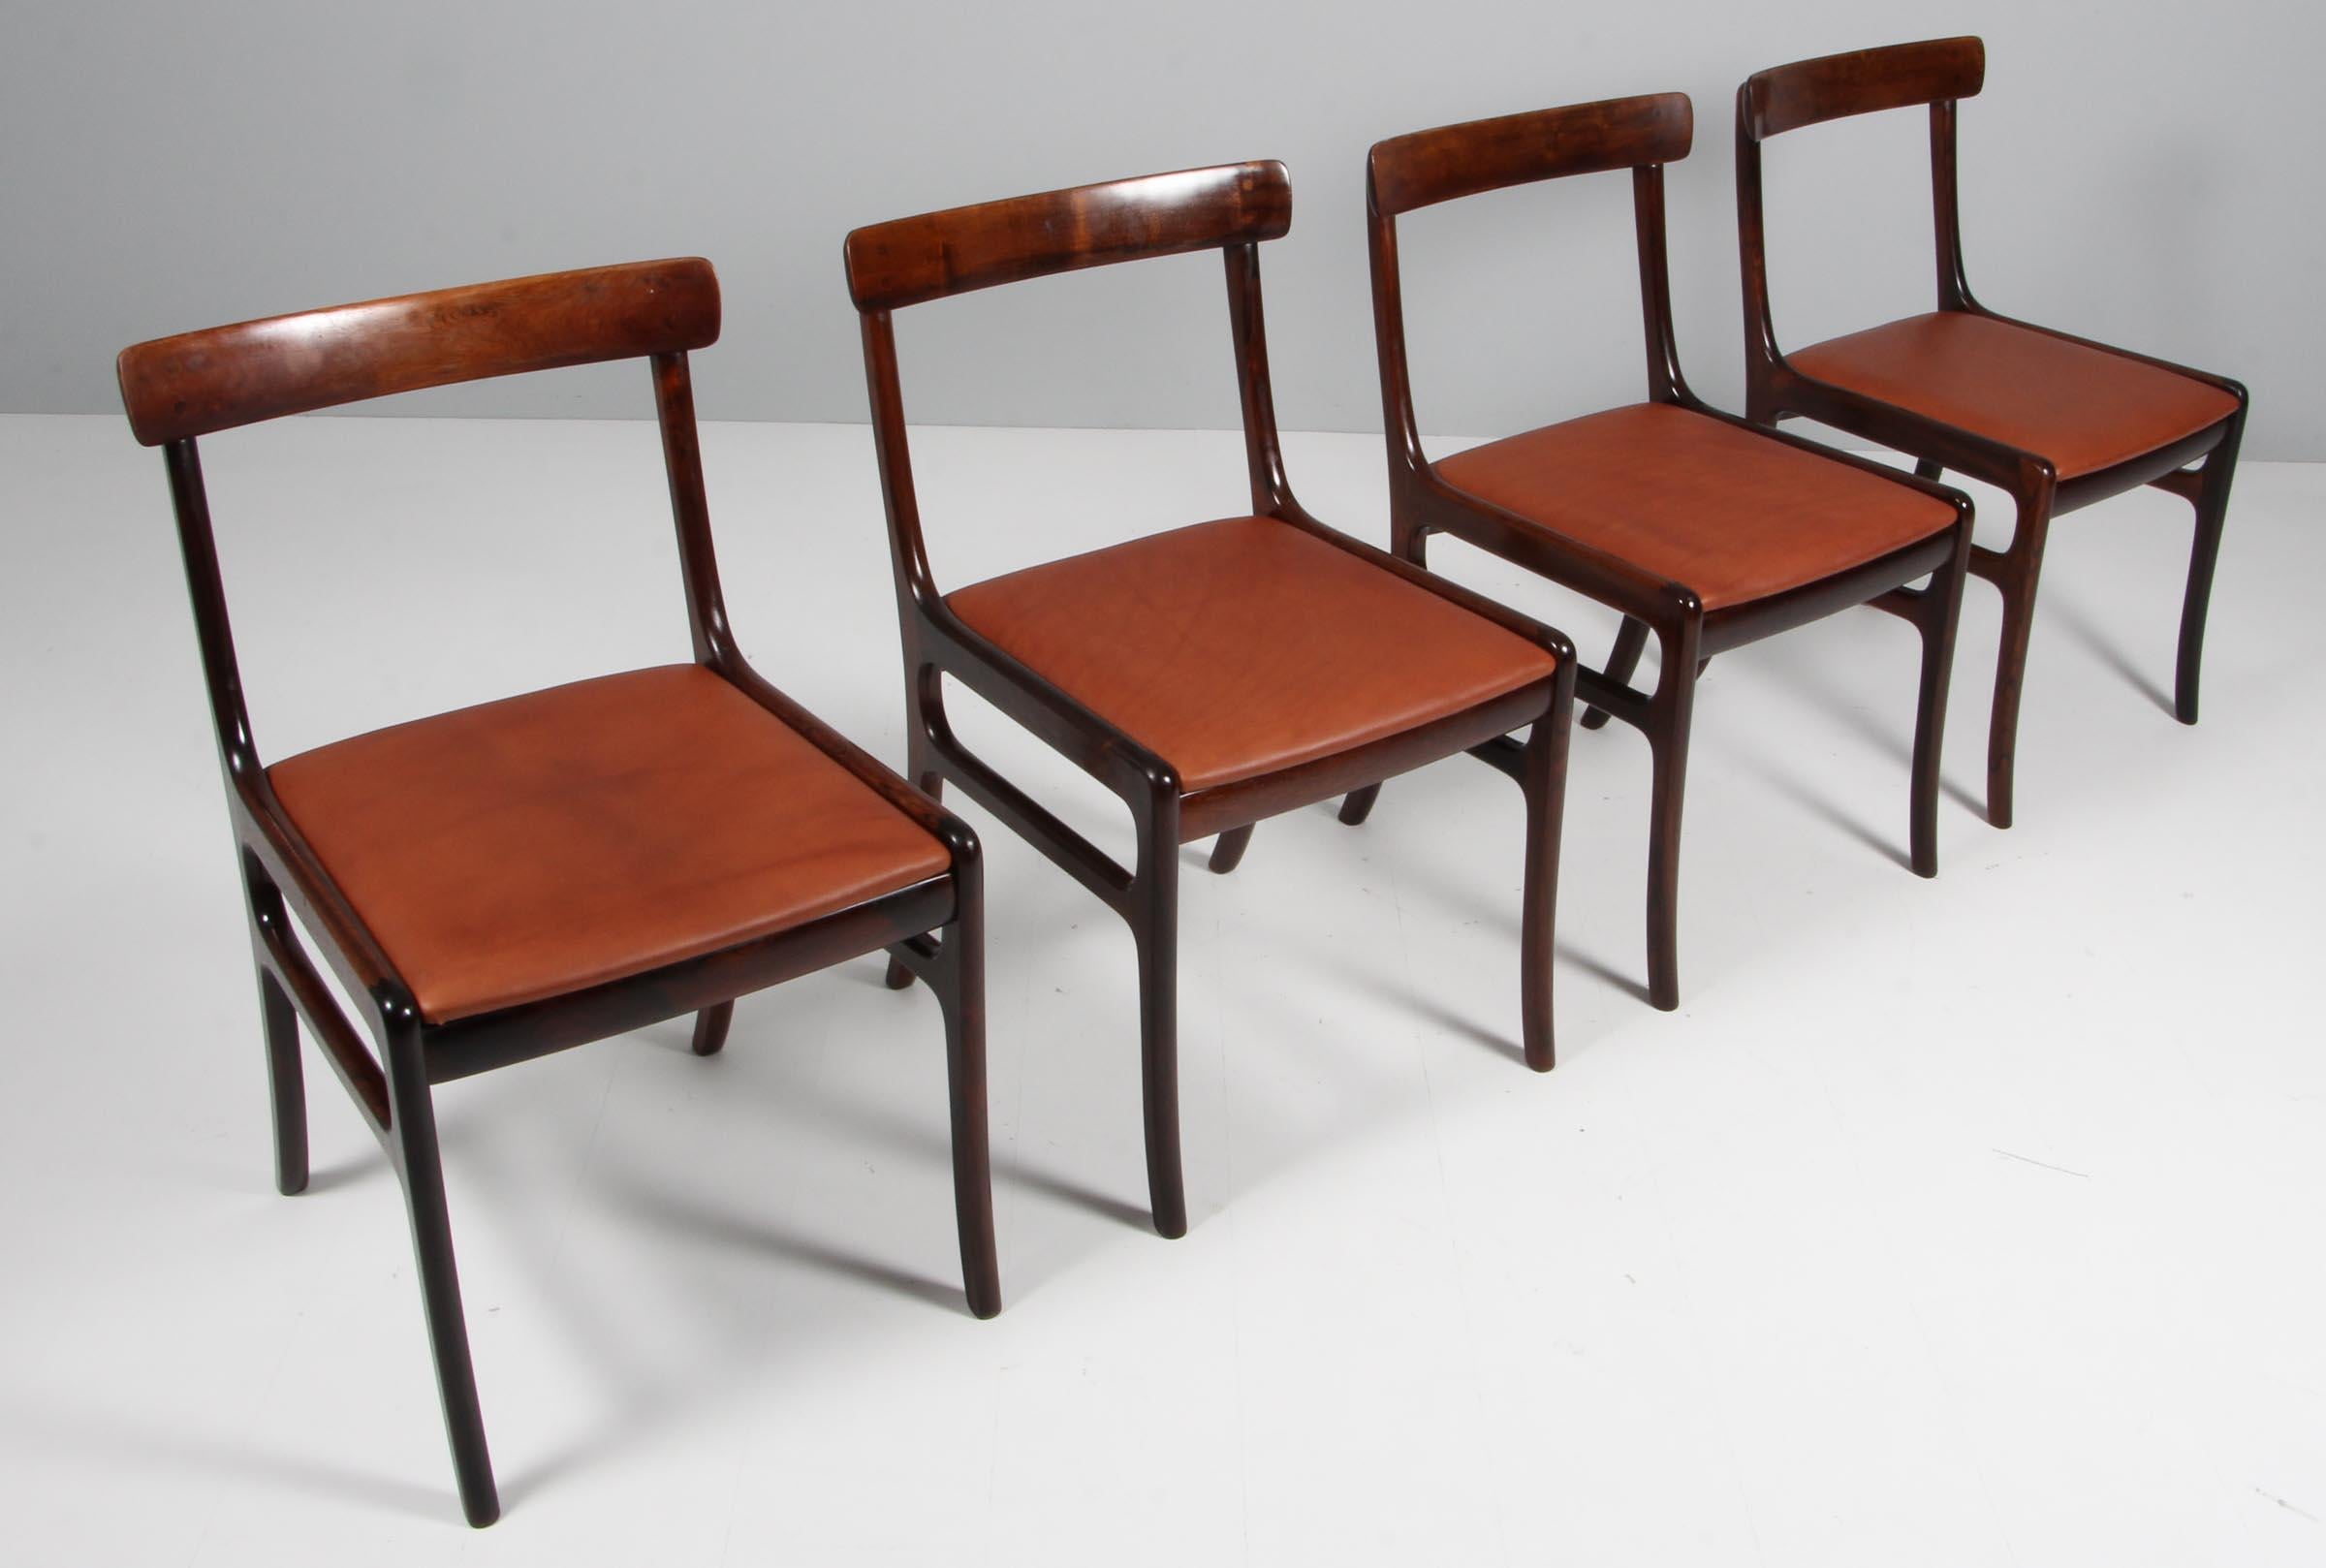 Ole Wanscher set of six Rungstedlun dining chairs in rosewood.

New upholstered with brandy aniline leather.

Model Rungstedlund, made by Poul Jeppesen.

